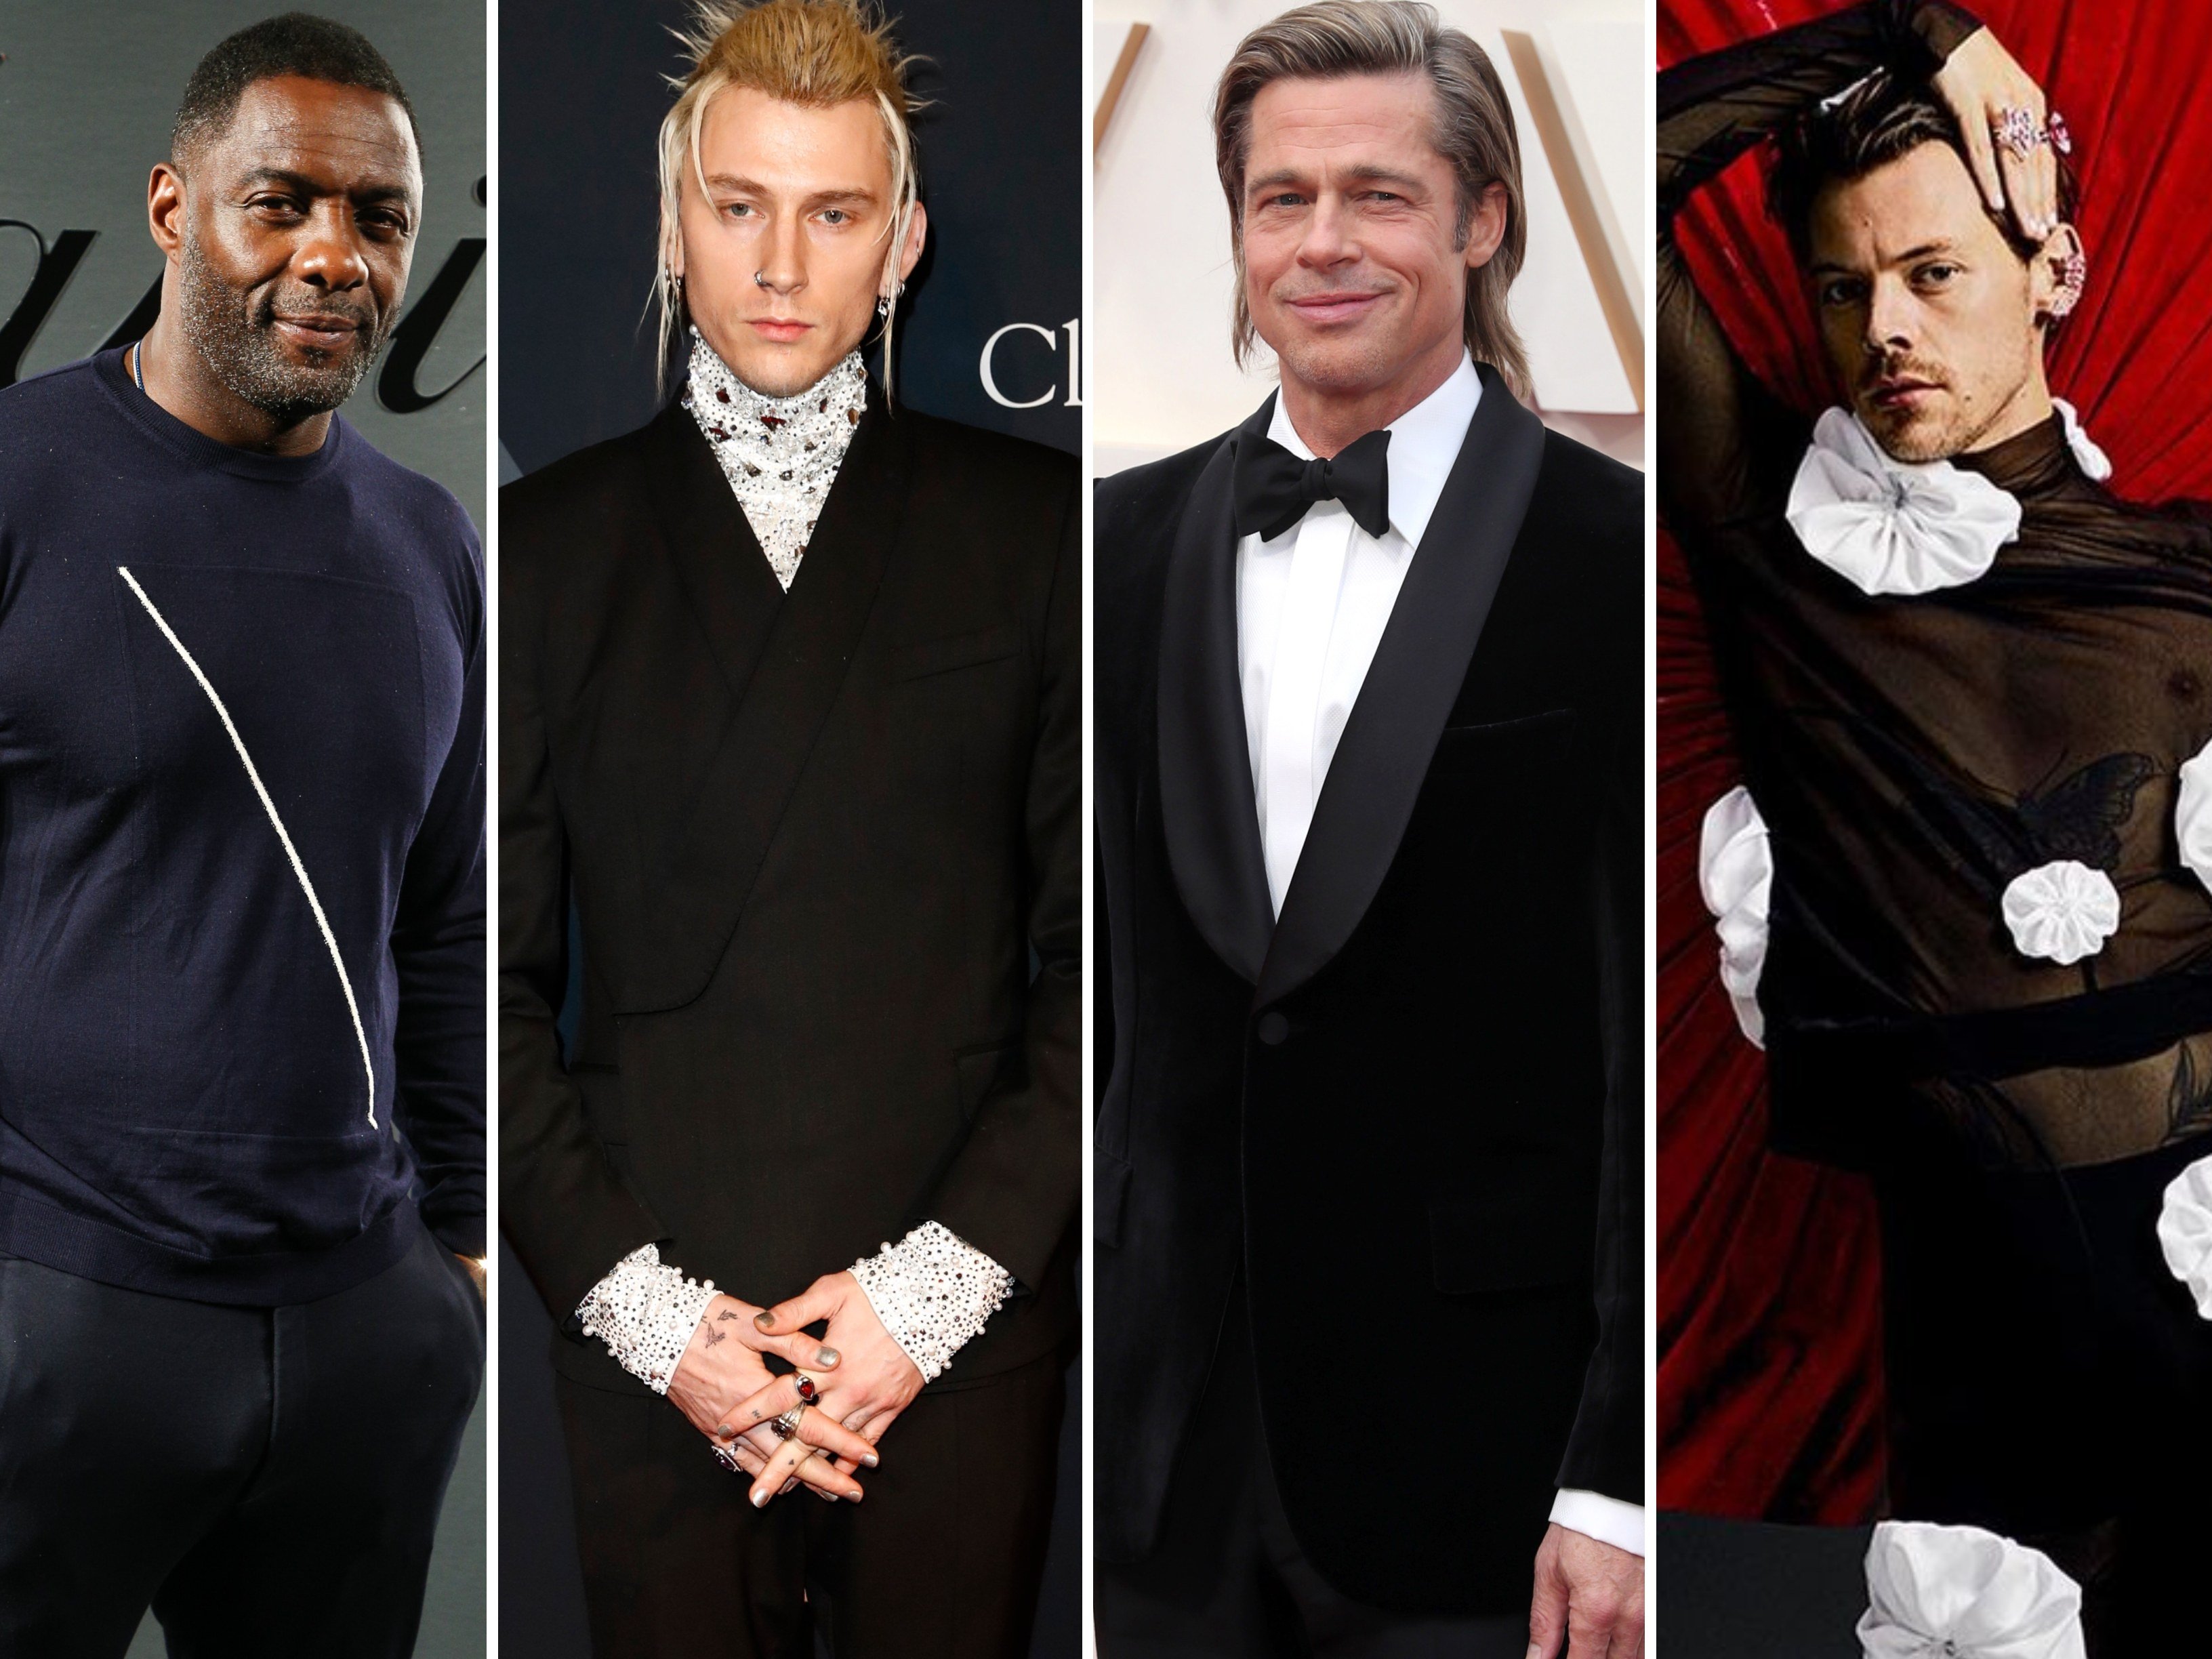 Male celebrities such as Idris Elba, Machine Gun Kelly. Brad Pitt and Harry Styles are joining in on the skincare brand hype. Photos: BFA, EPA-EFE, @pleasing/Instagram